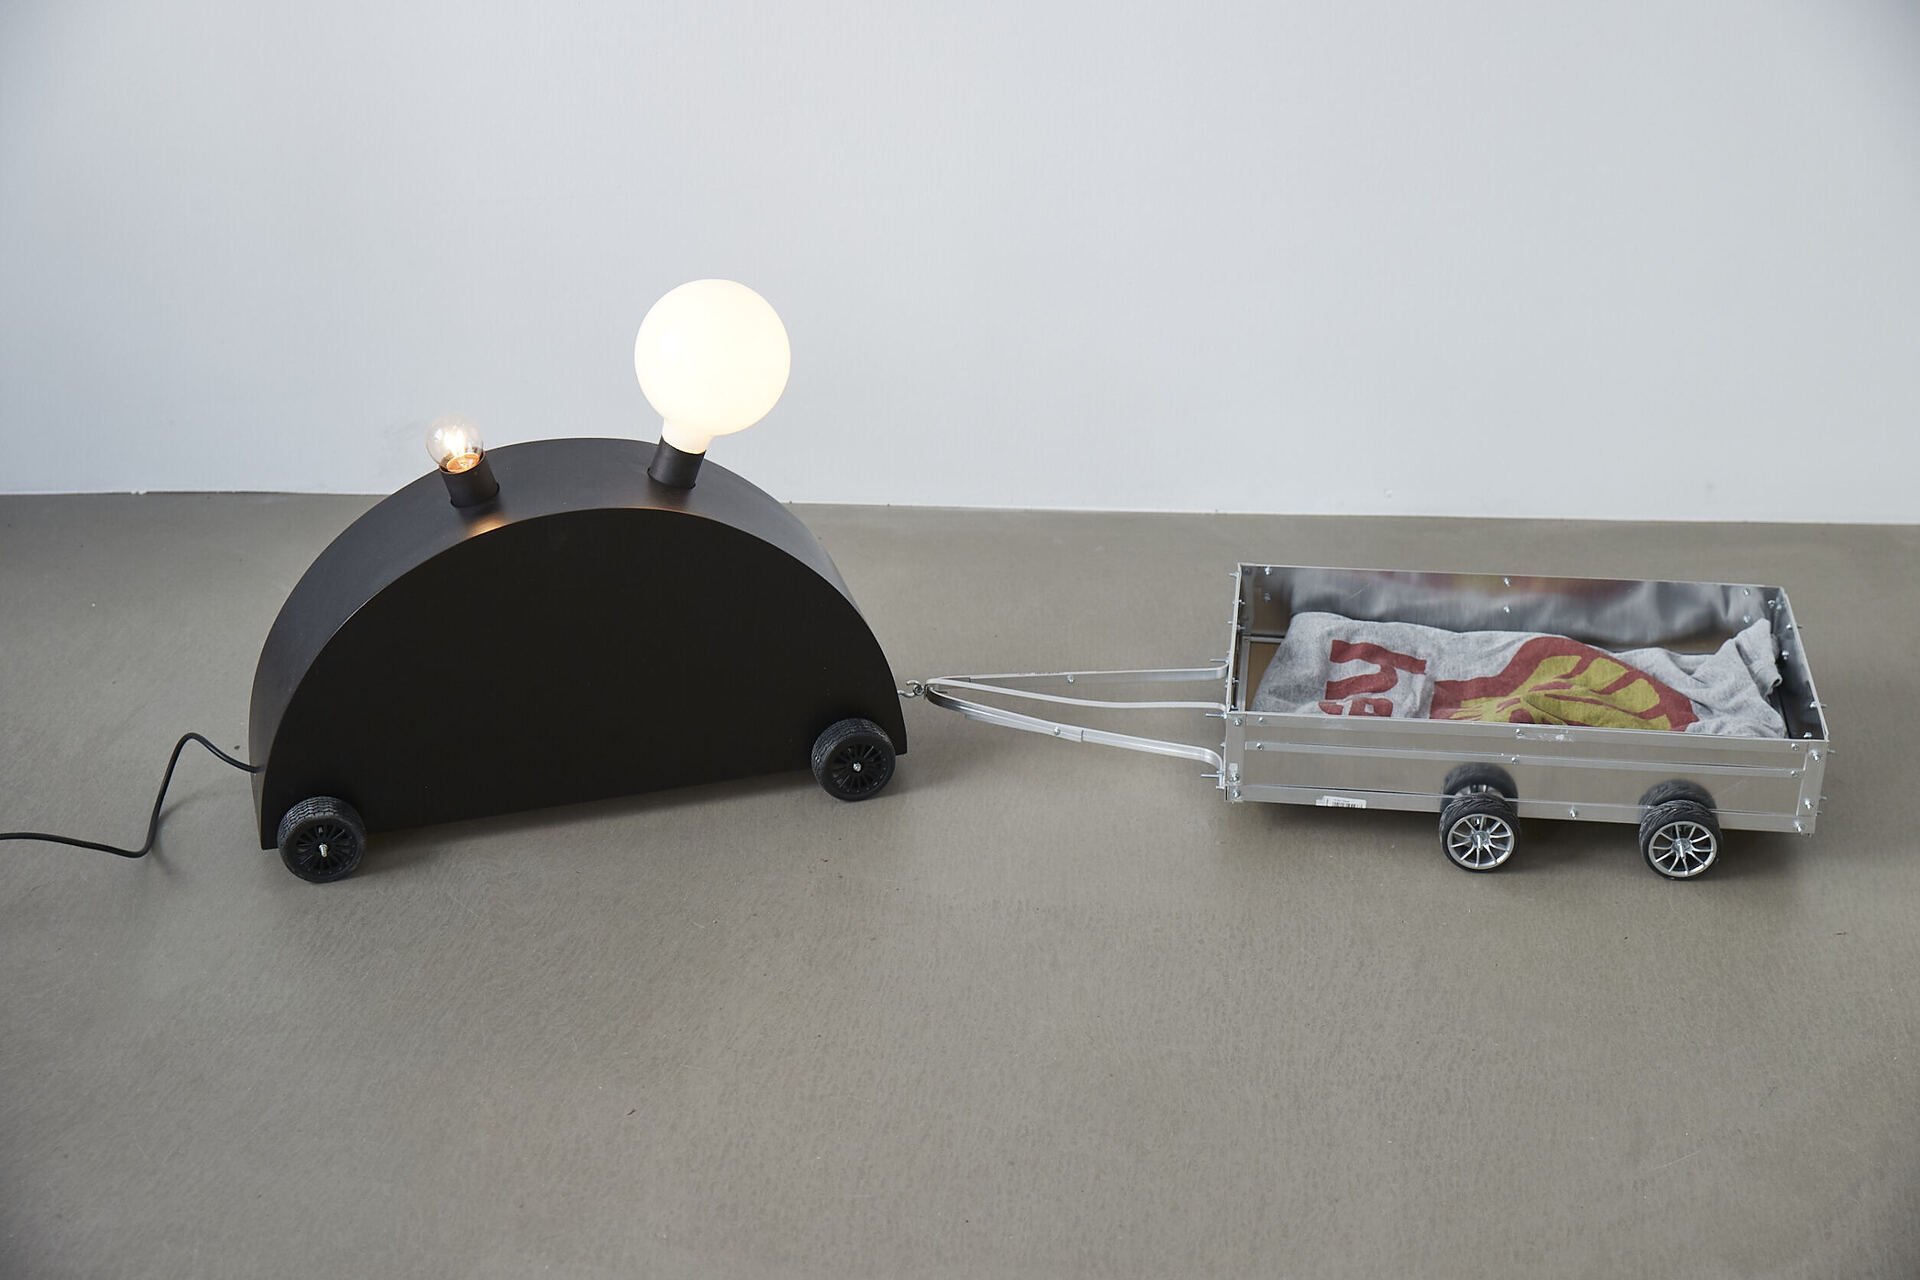 Frieder Haller, Memphis Blues (after Martine Bedin) VI, 2021 Wood, wire, board, electrical wiring, two light bulbs and model car wheels 45 × 127,5 × 34 cm / 17.7 × 50.1 × 13.3 inches